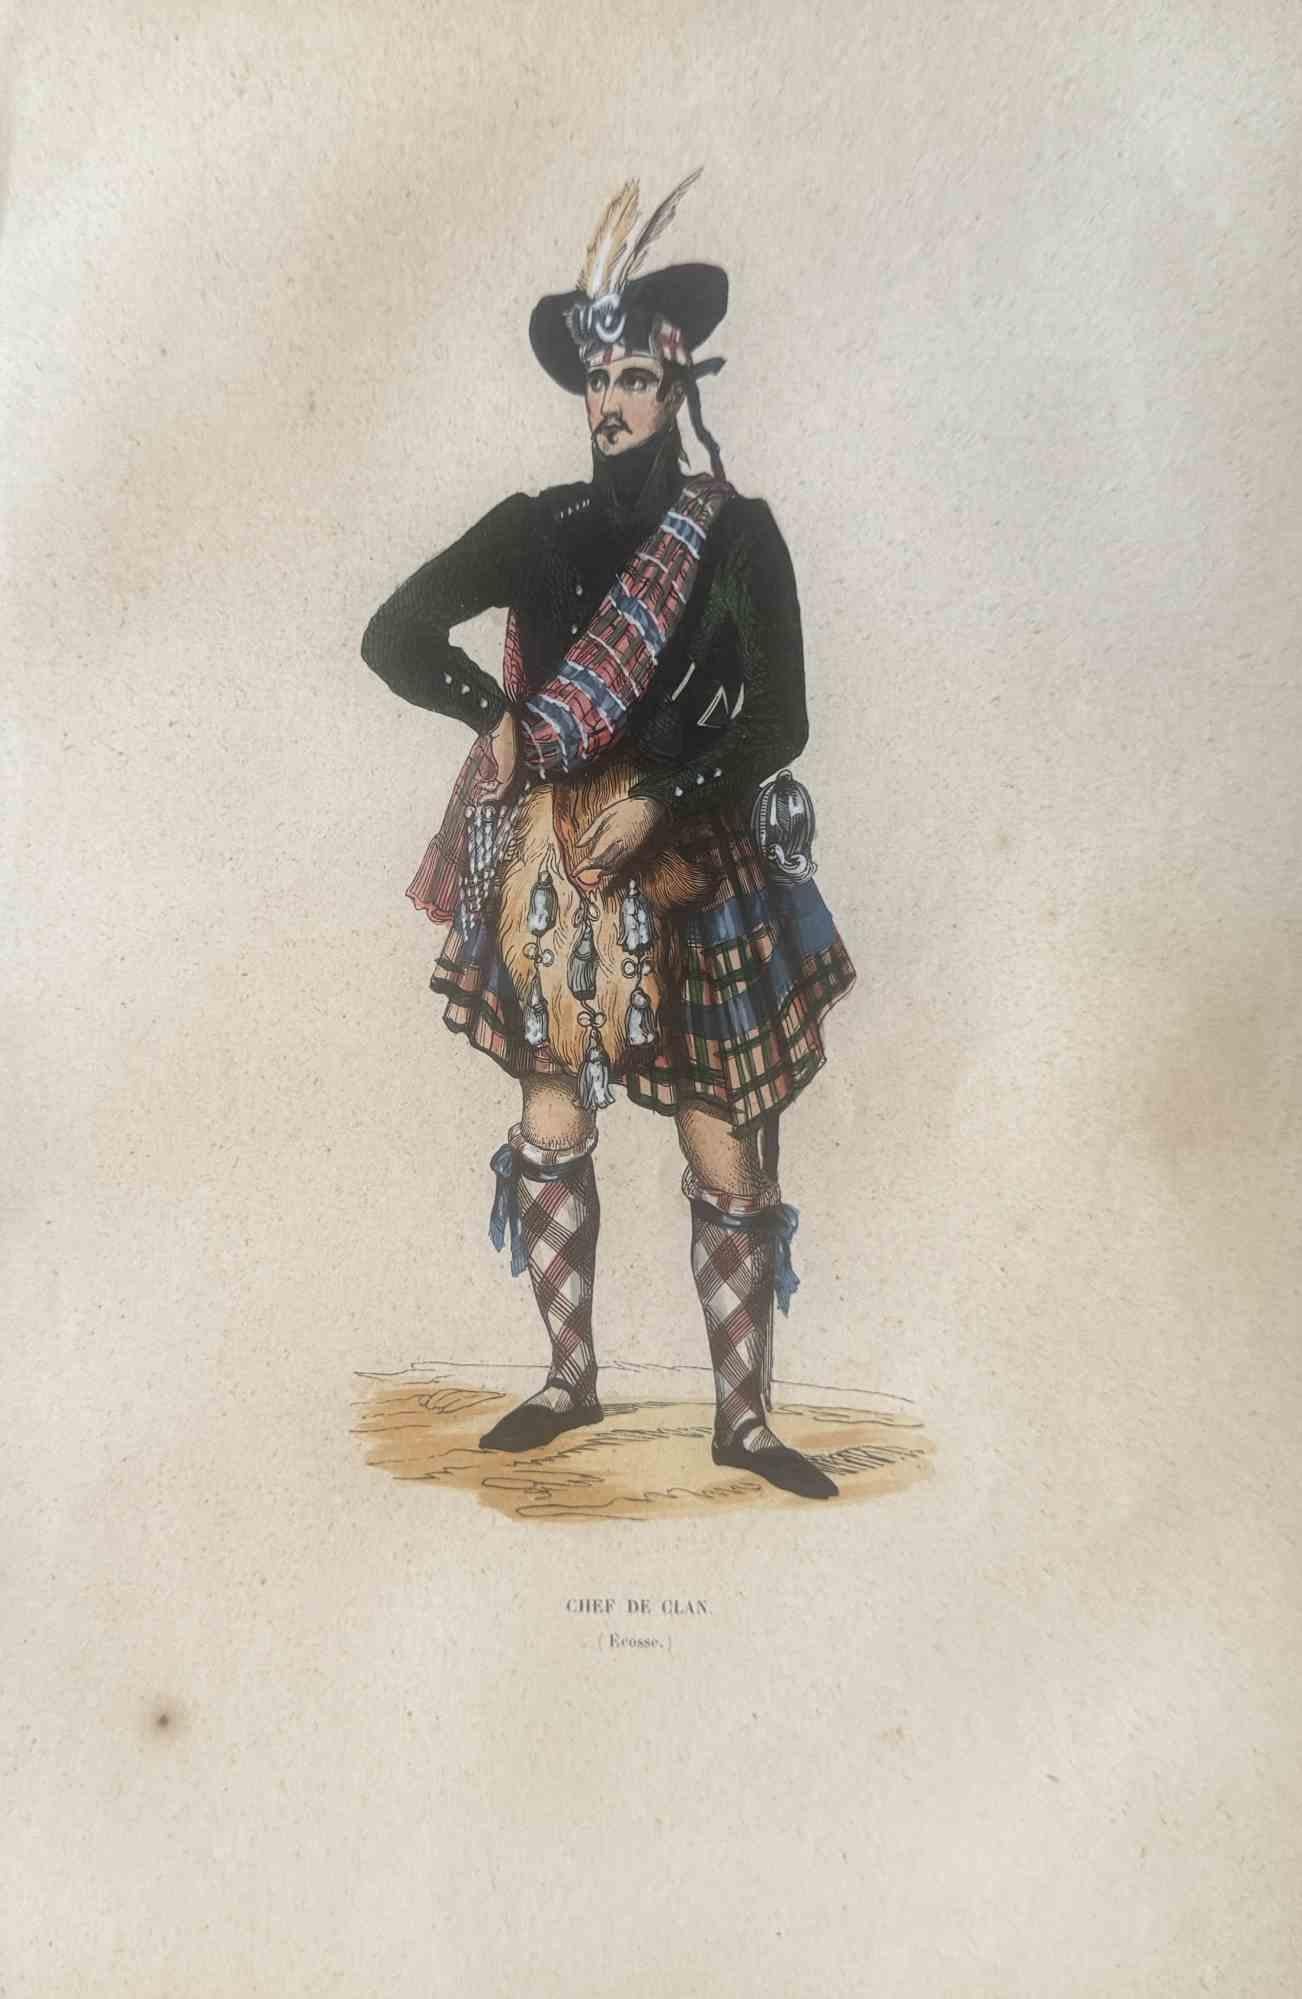 Uses and Customs - Chef de Clan - Lithograph - 1862